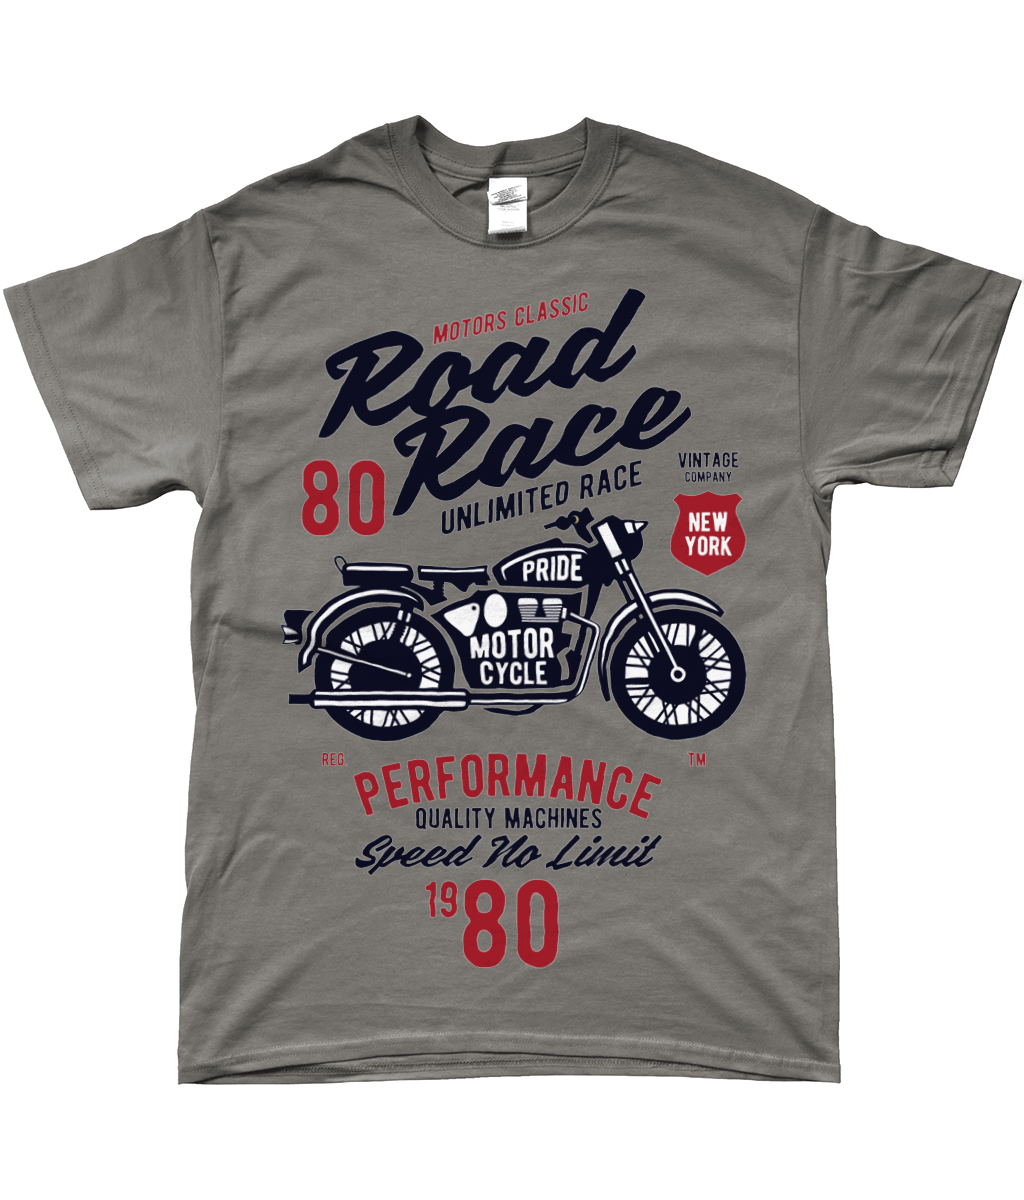 Road Race Motorcycle – SoftStyle Ringspun T-Shirt